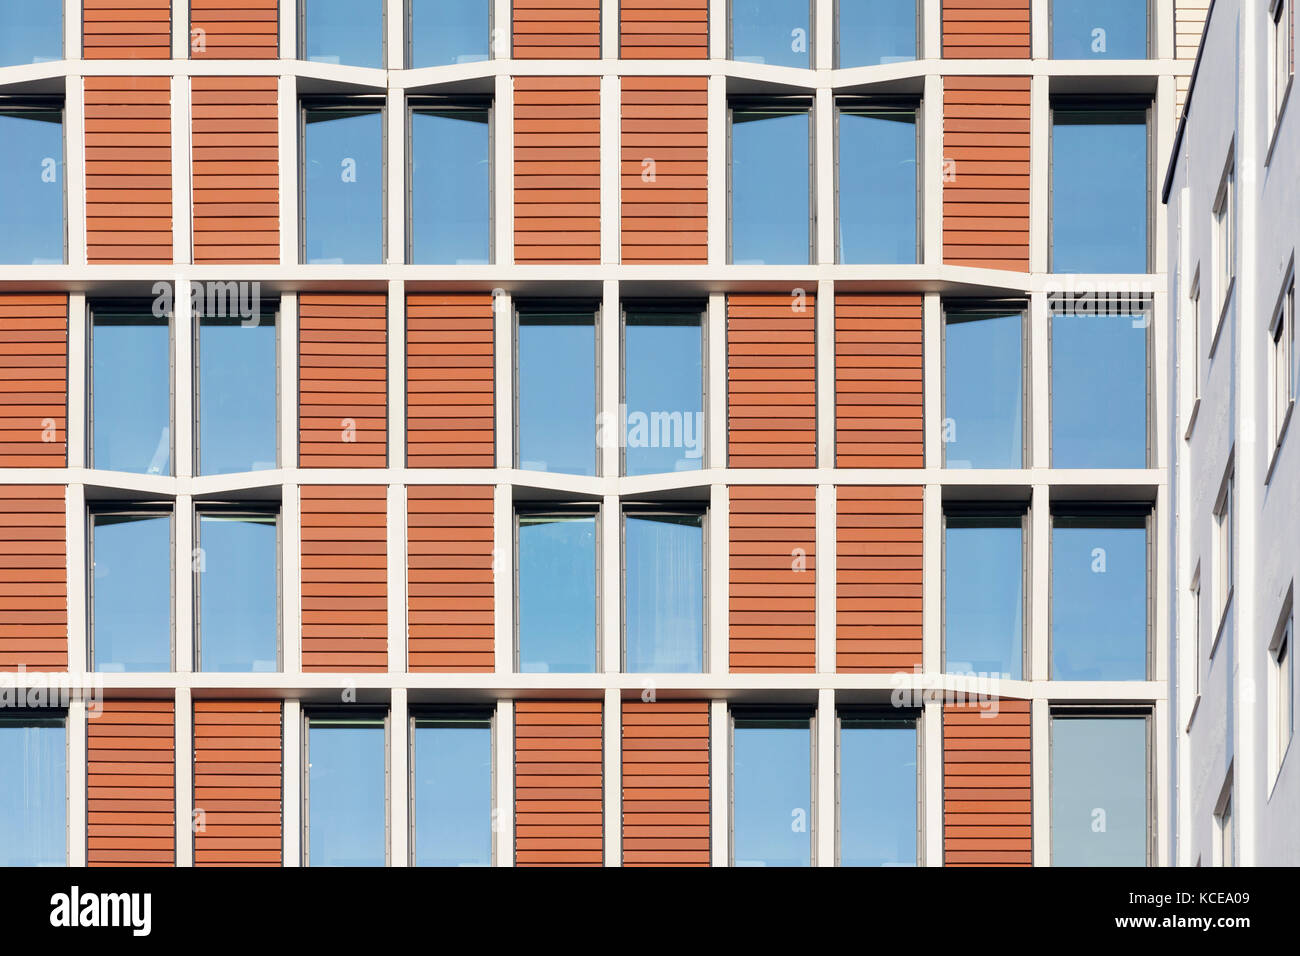 Patterns formed from the windows and cladding on the facade of student accommodation in London. The structure comprises a reinforced concrete frame wi Stock Photo